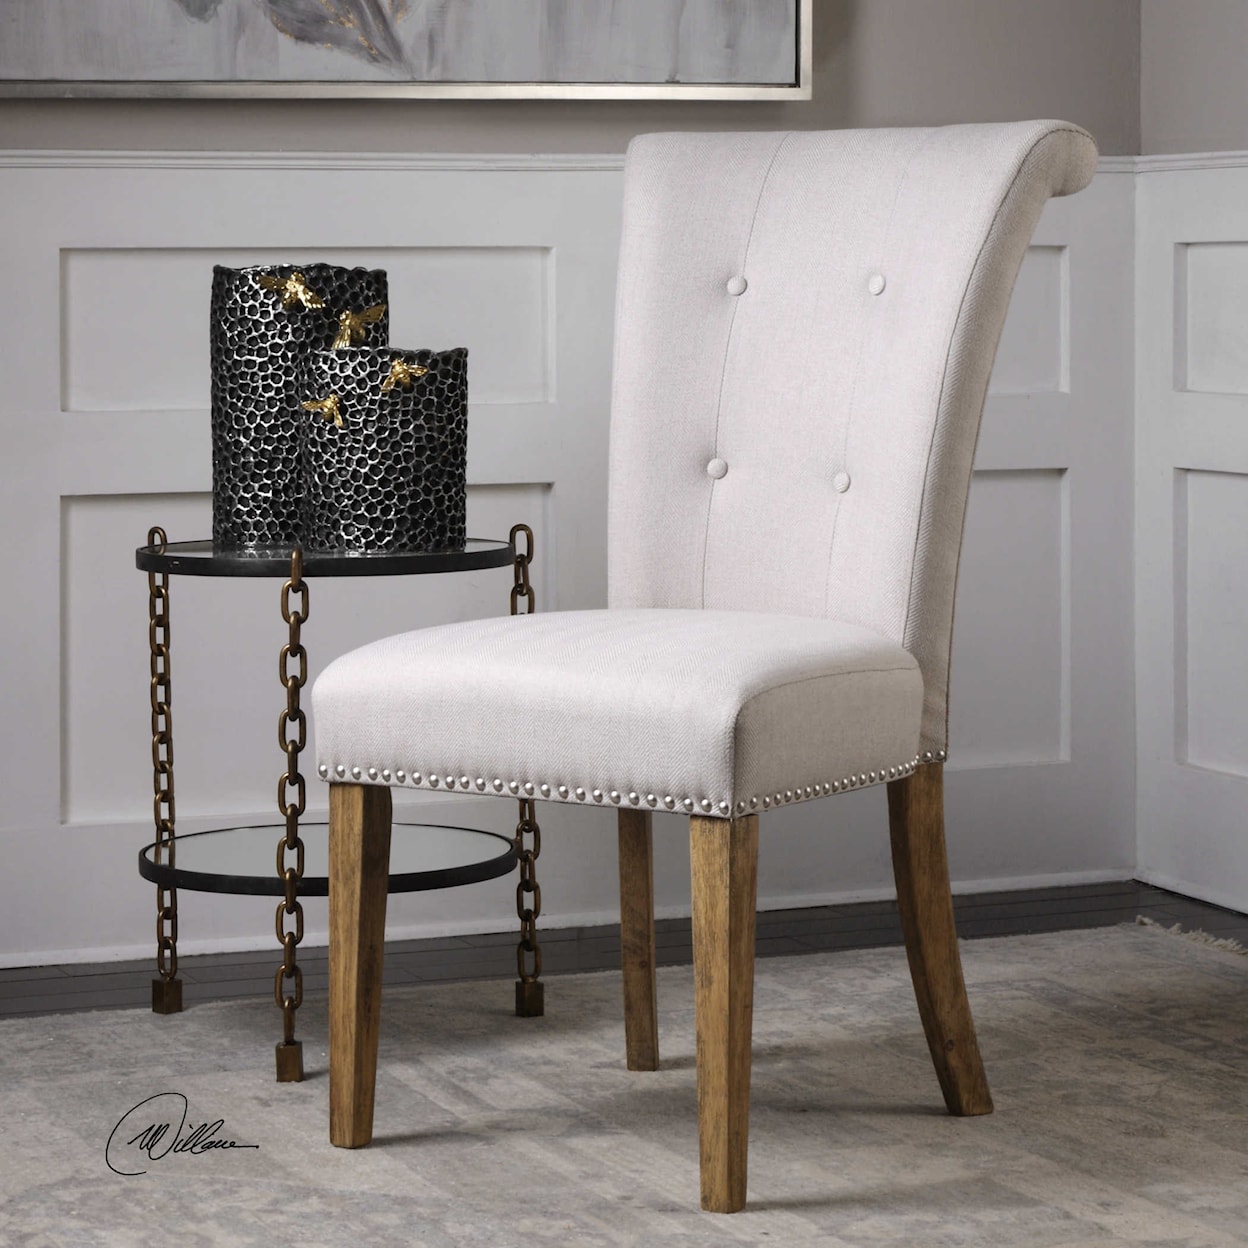 Uttermost Accent Furniture Lucasse Oatmeal Dining Chair